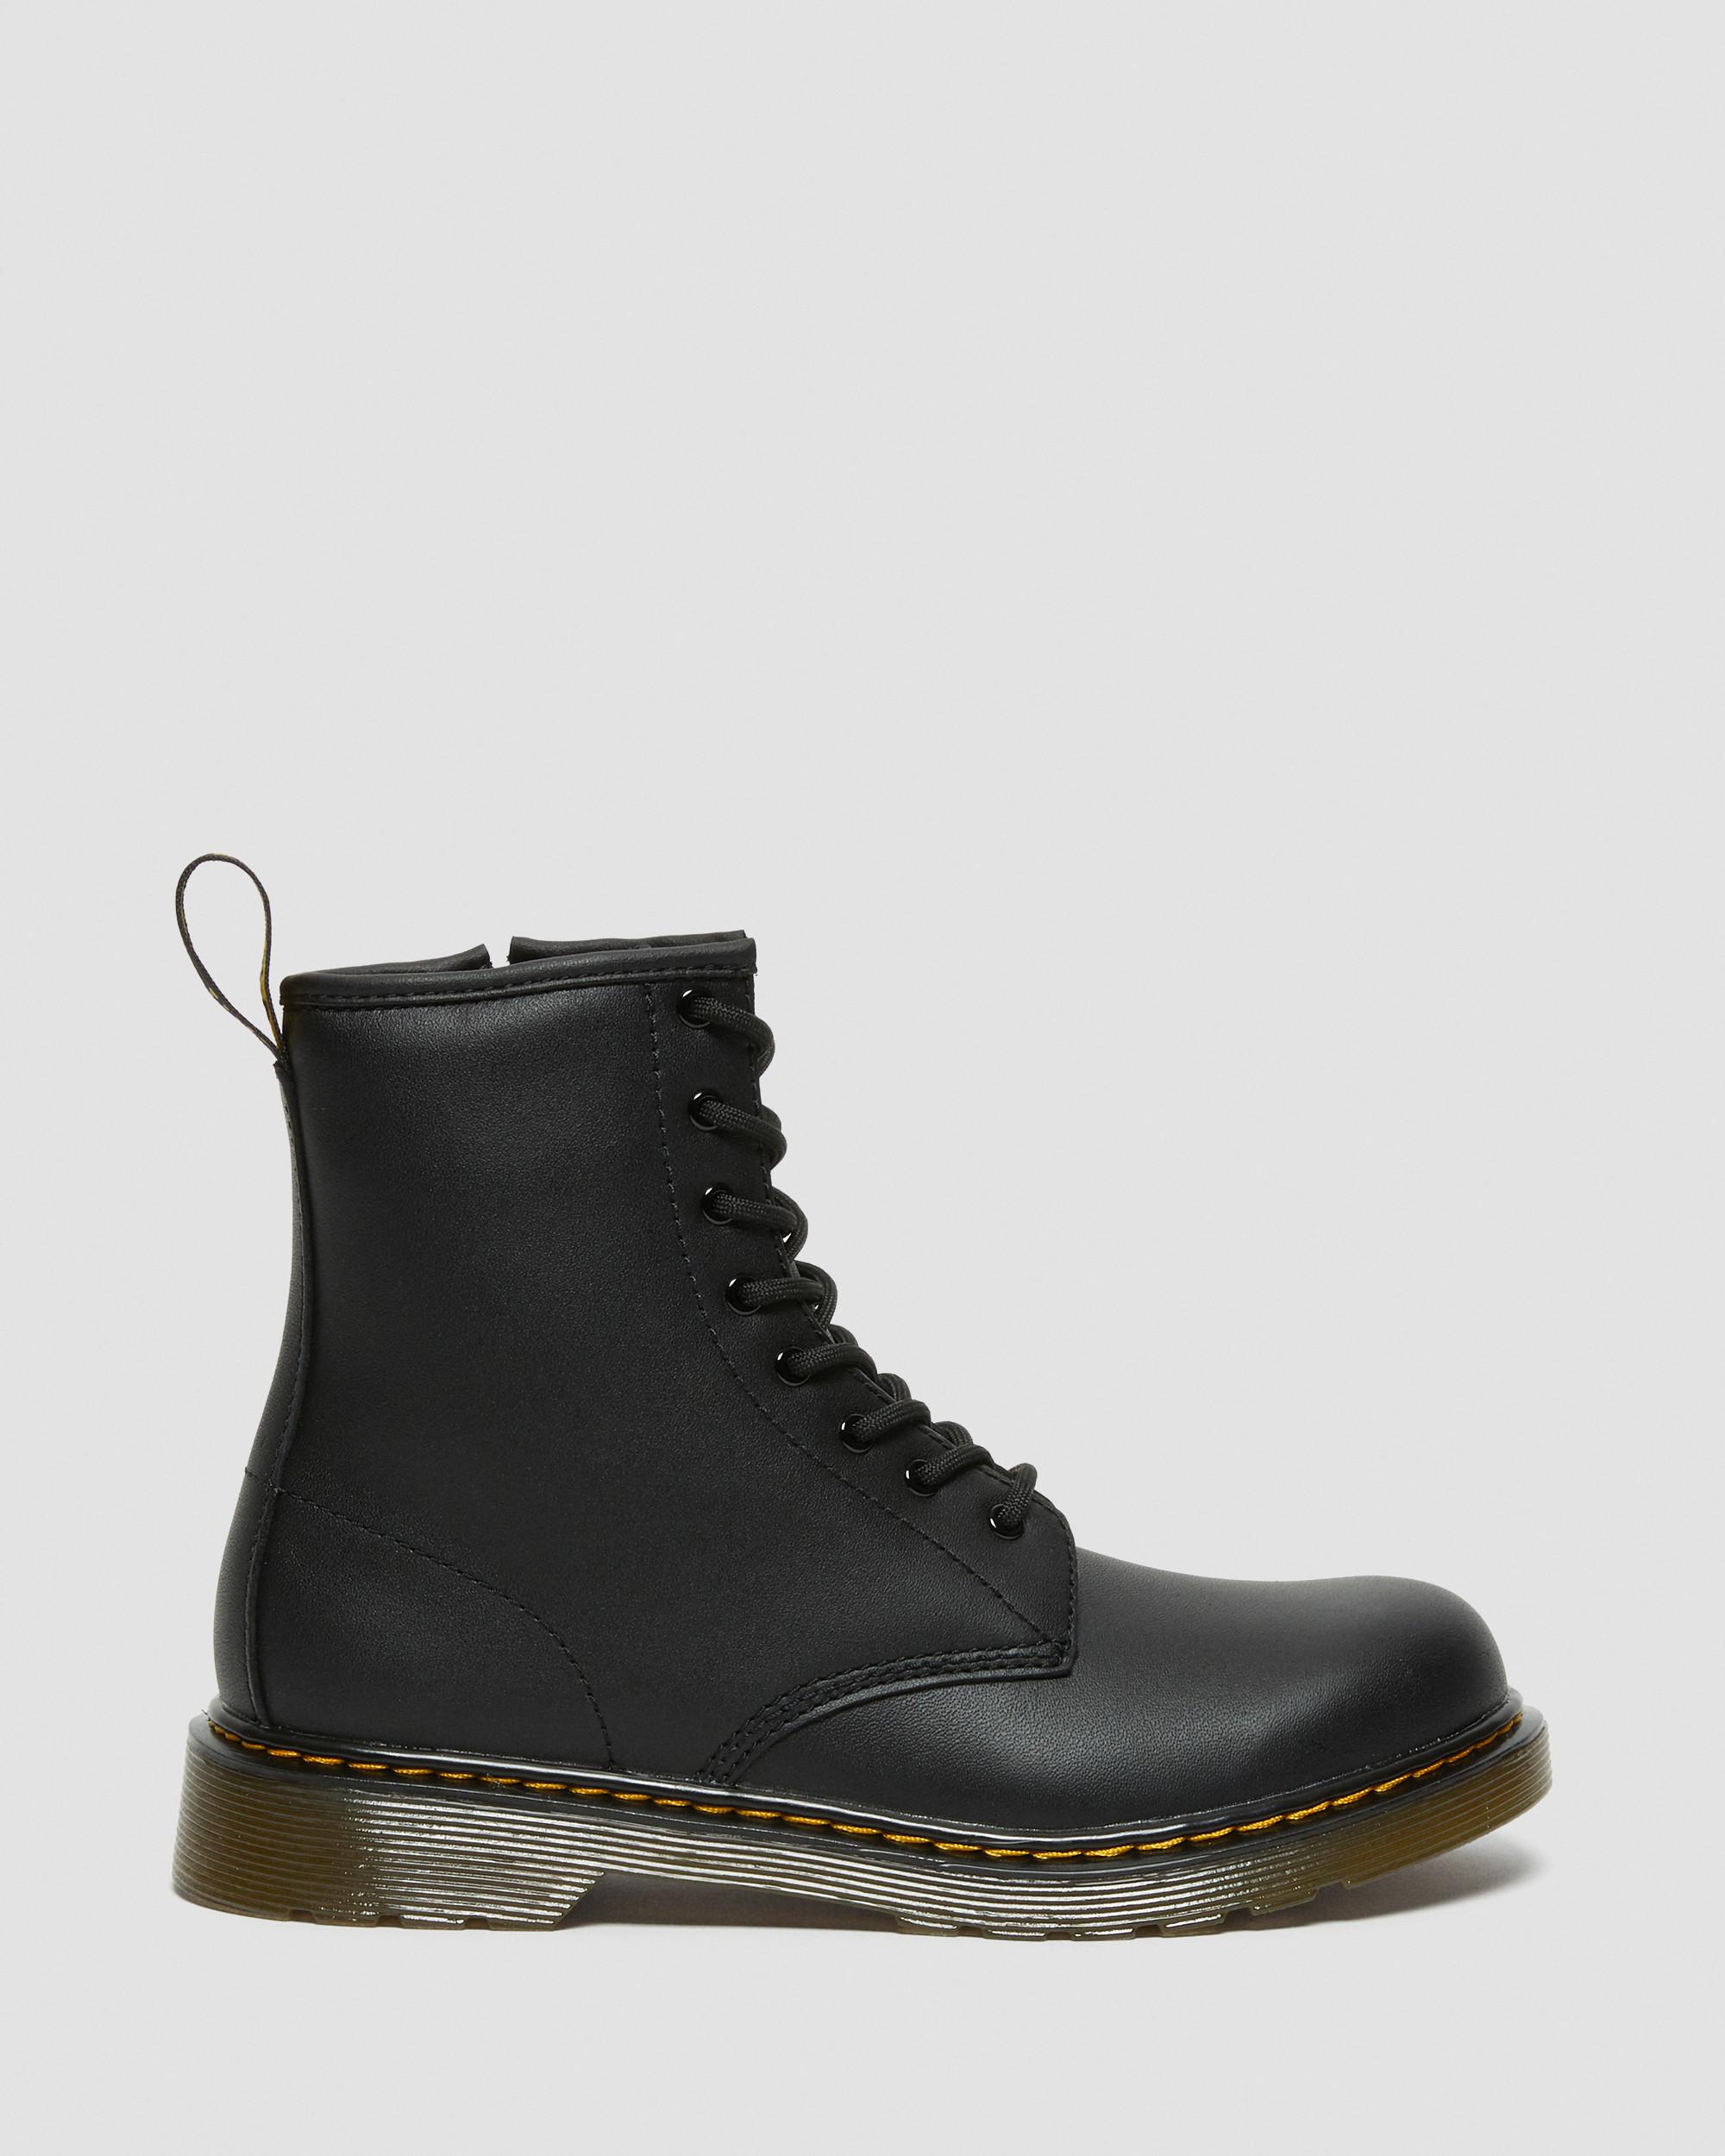 Youth 1460 Softy Dr. Black Martens Boots Leather Lace T Up | in